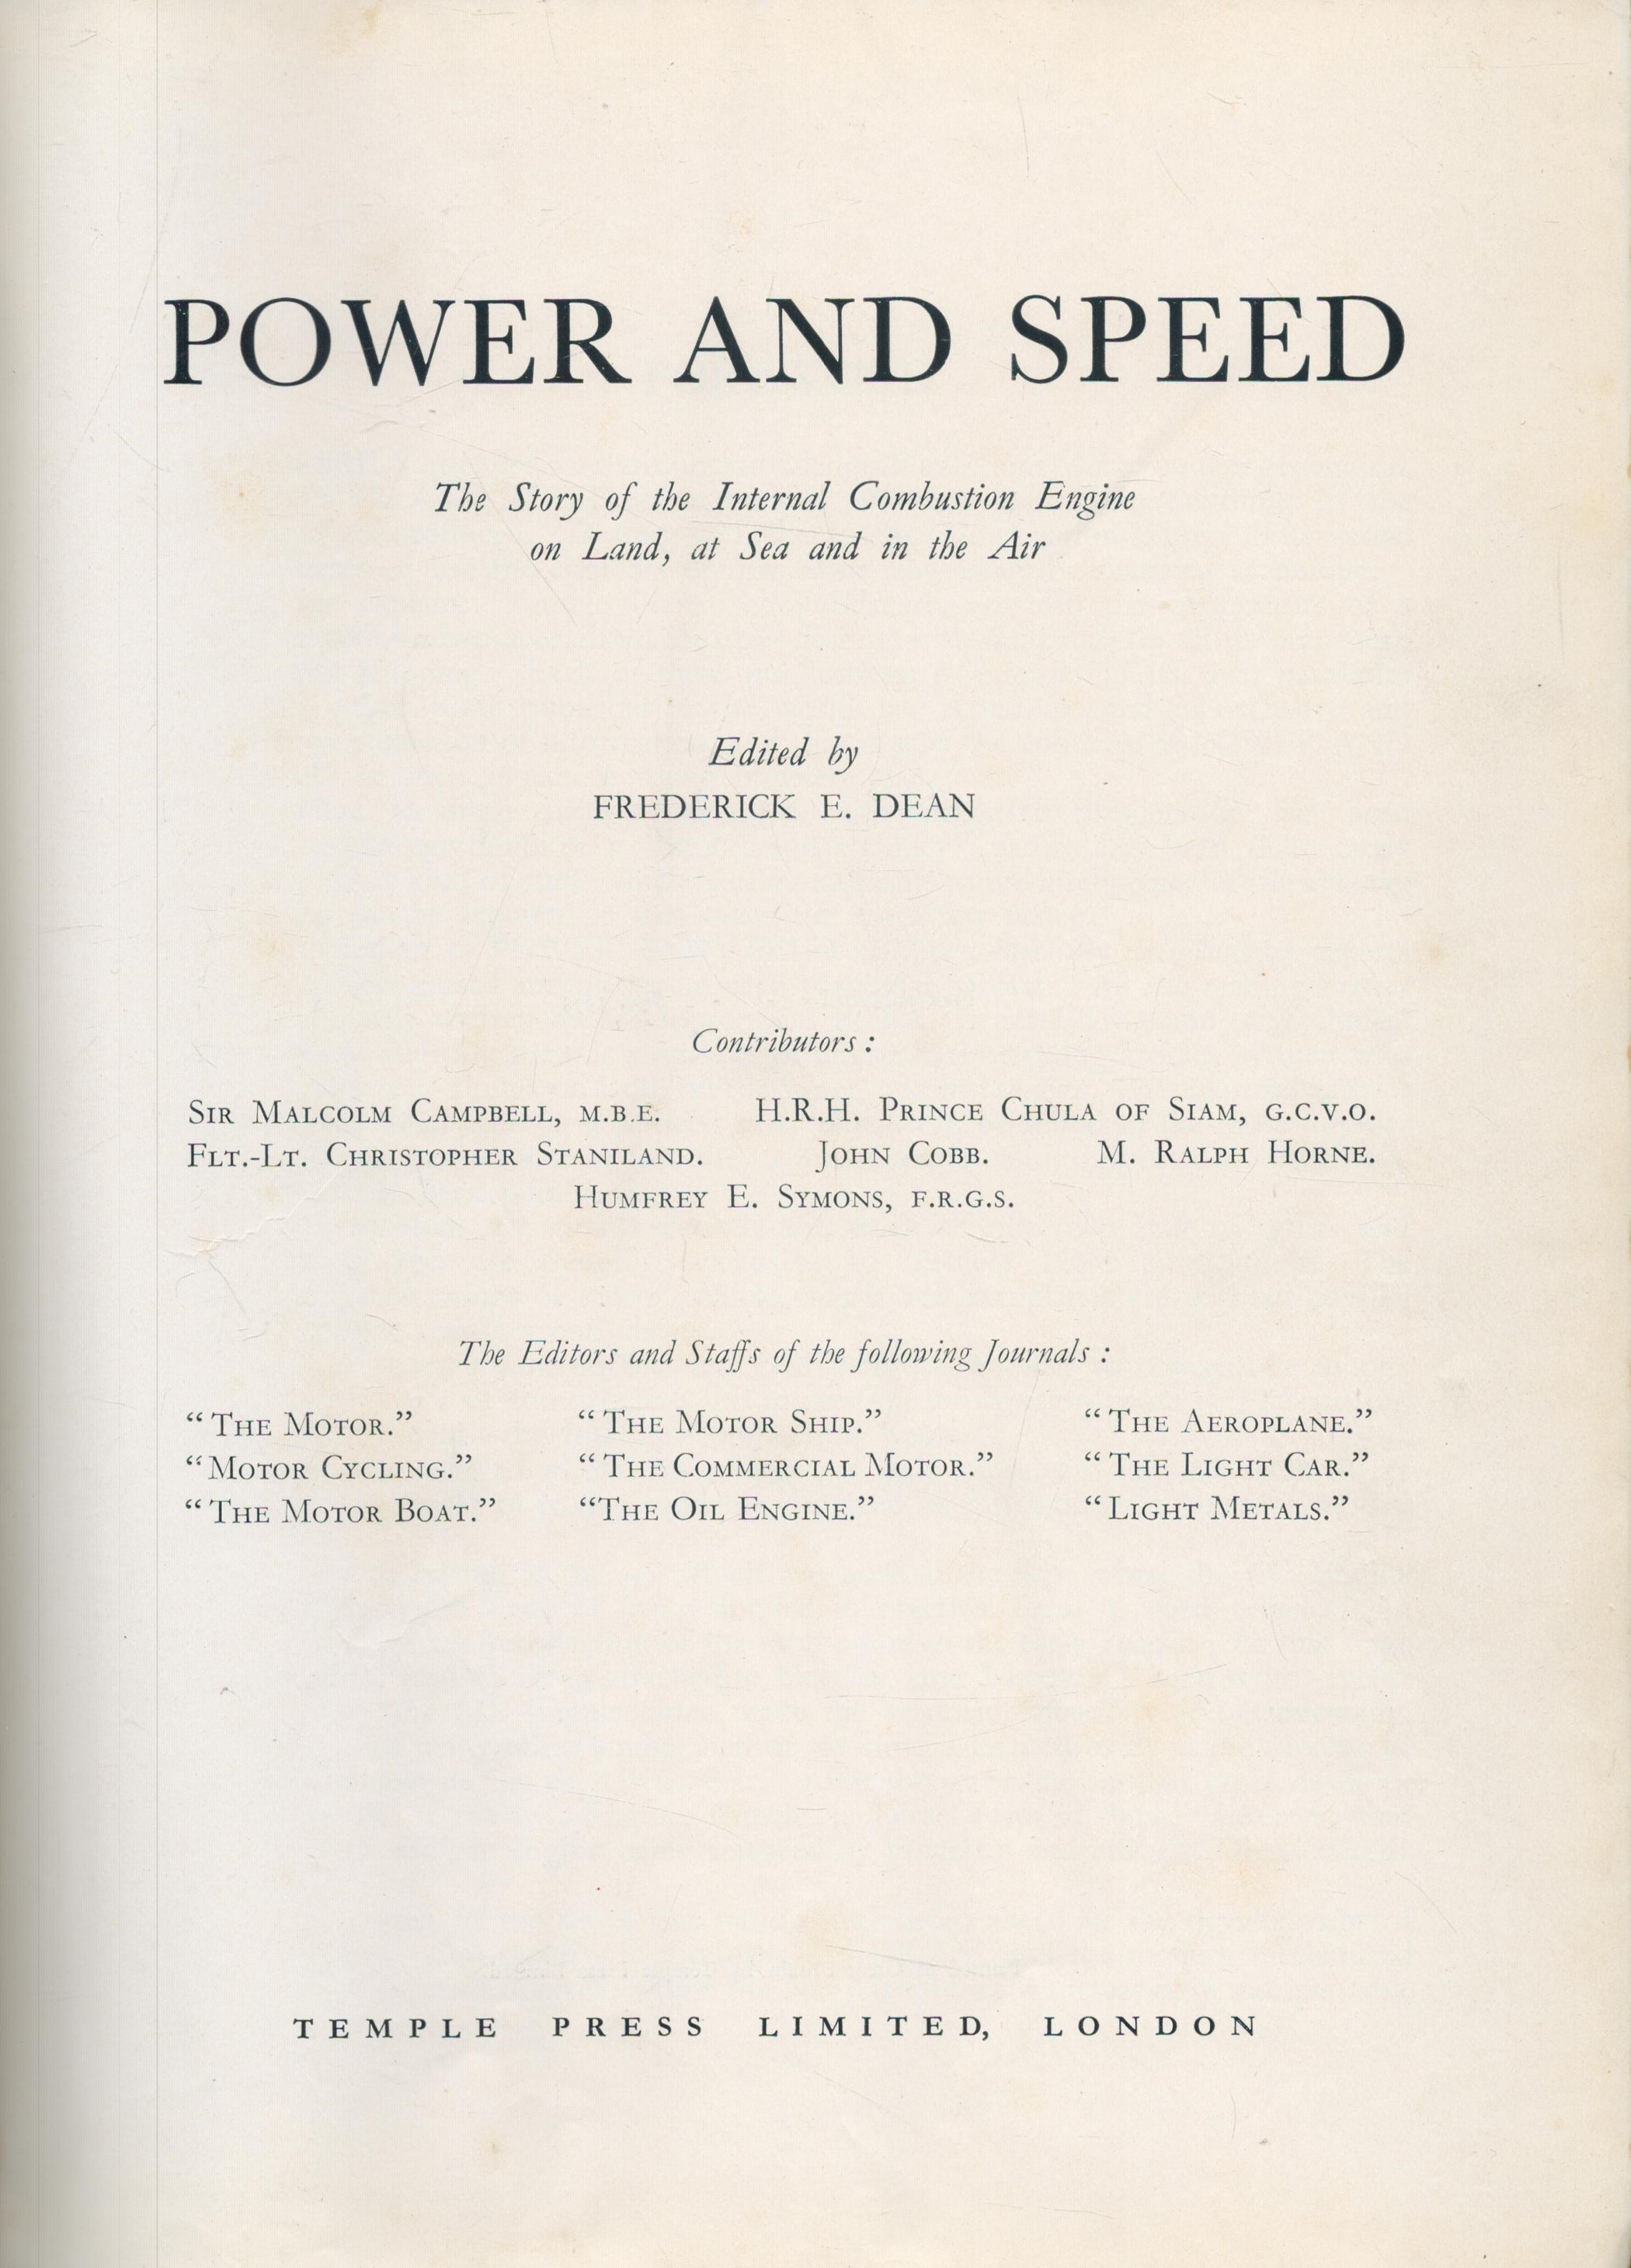 Power and Speed - The Story of the Internal Combustion Engine on Land, at Sea and in the Air - Image 5 of 9